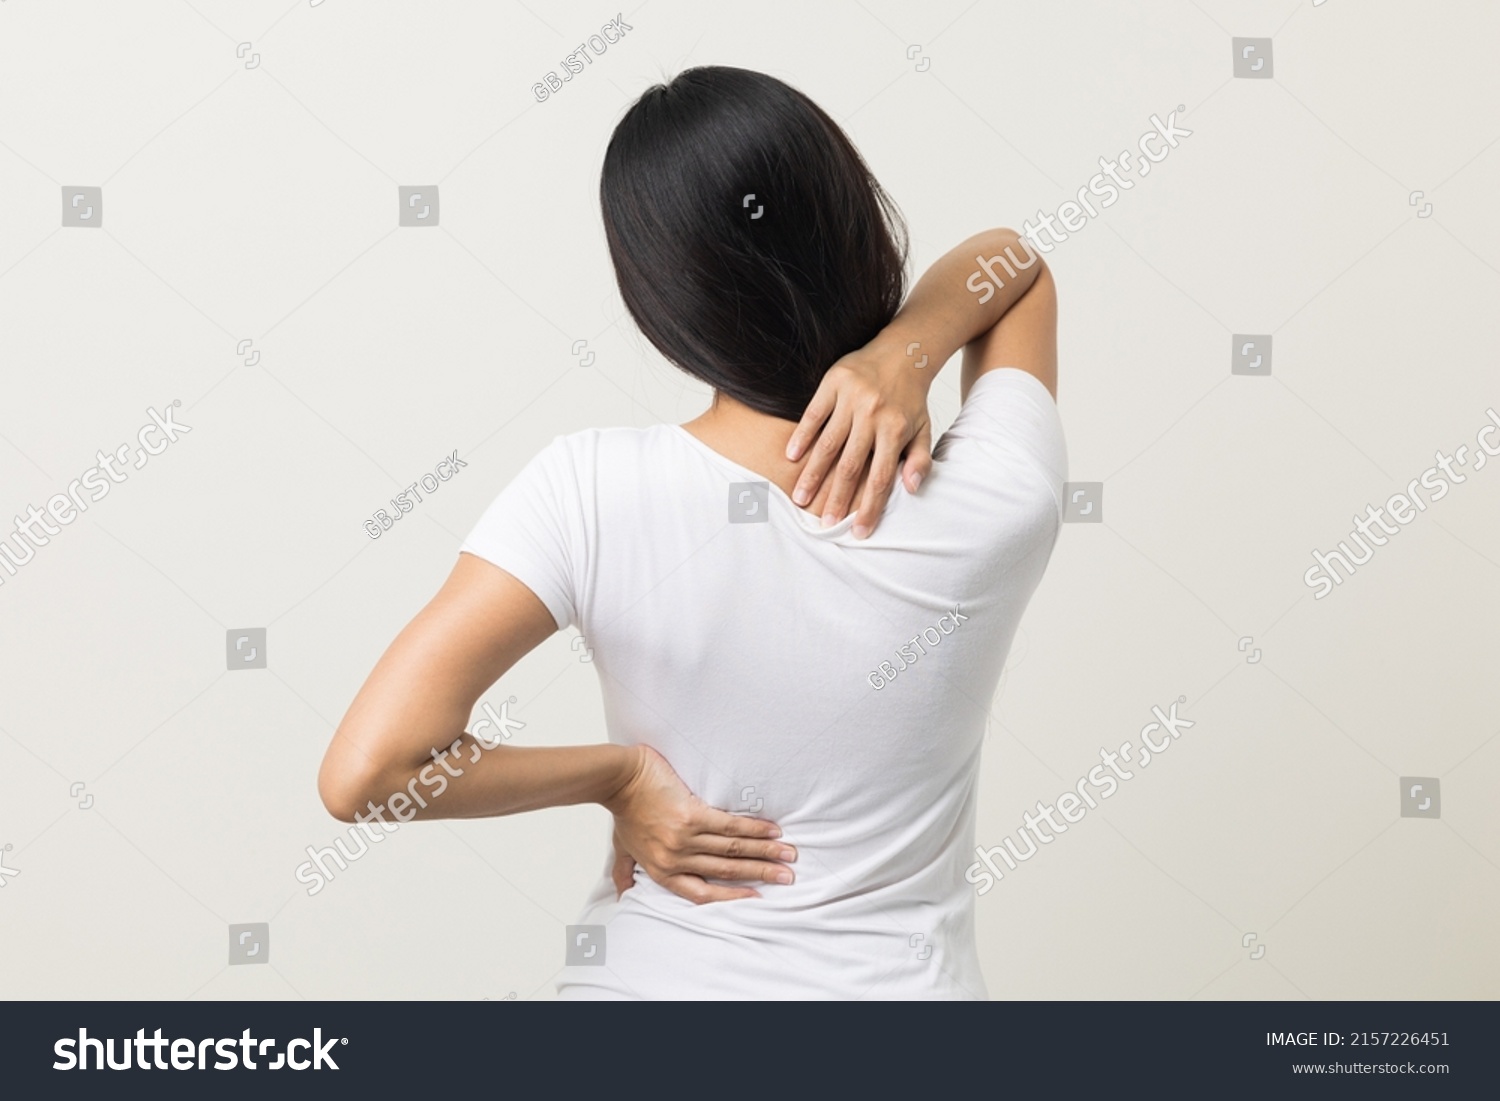 Asian woman has problem with structural posture She had neck and back pain. She massaged her neck and shoulders for relief. reduce muscle tension. Standing on isolated white background #2157226451